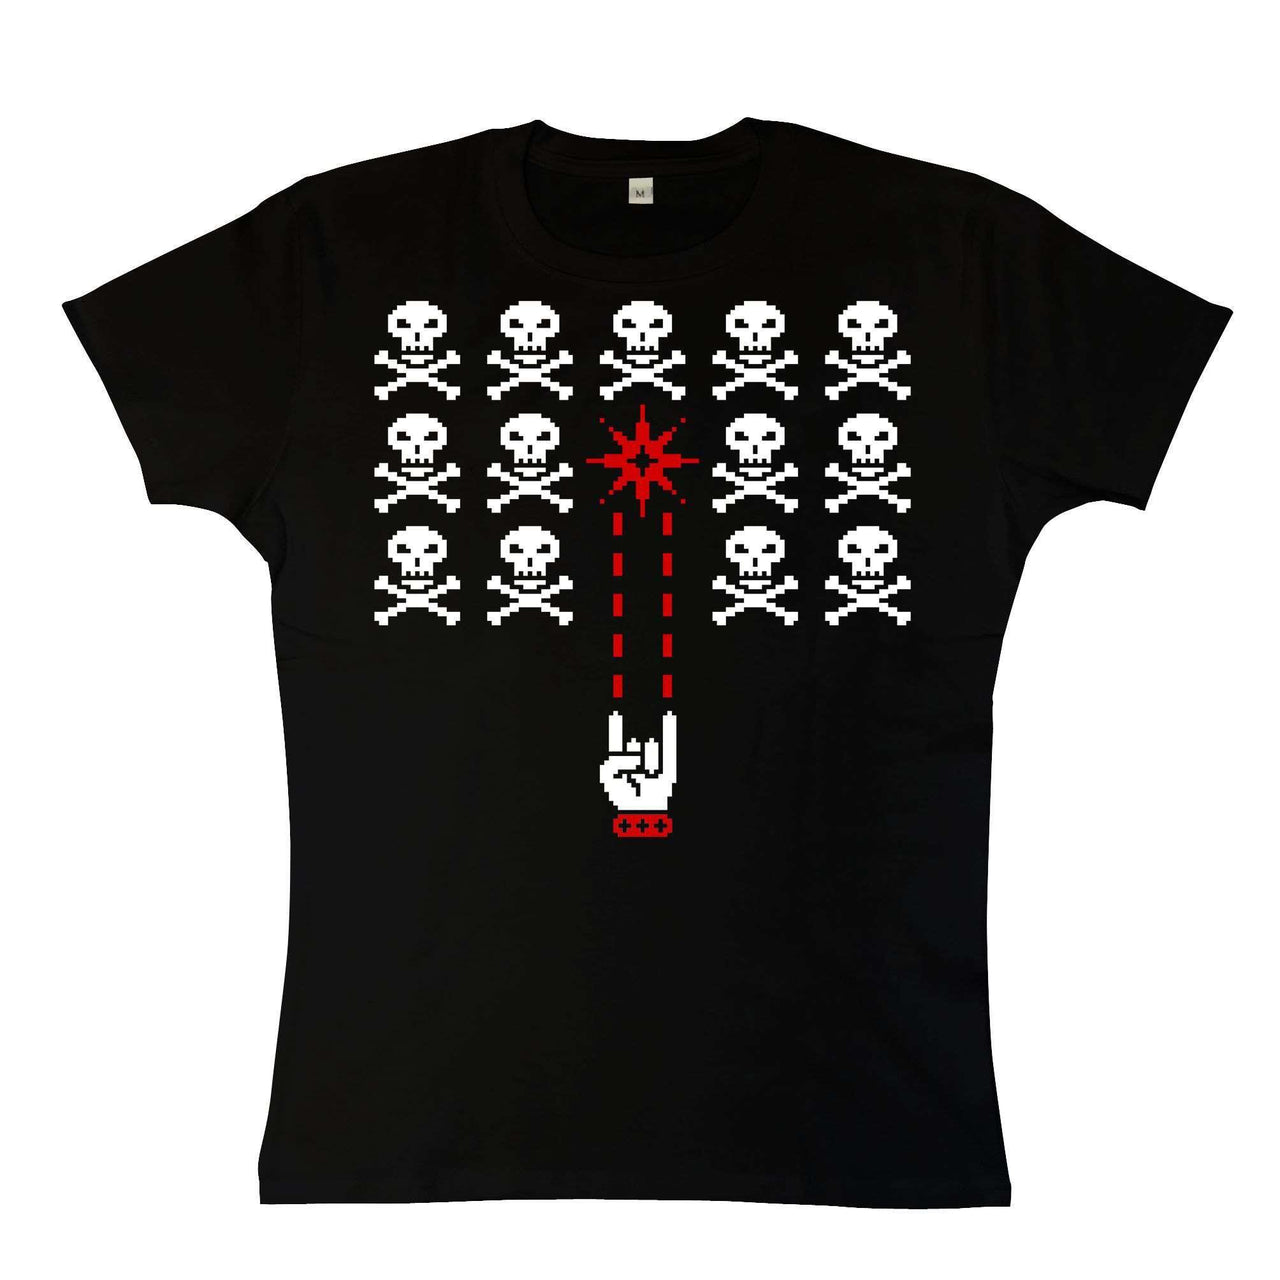 Skull Invaders Womens Fitted T-Shirt 8Ball